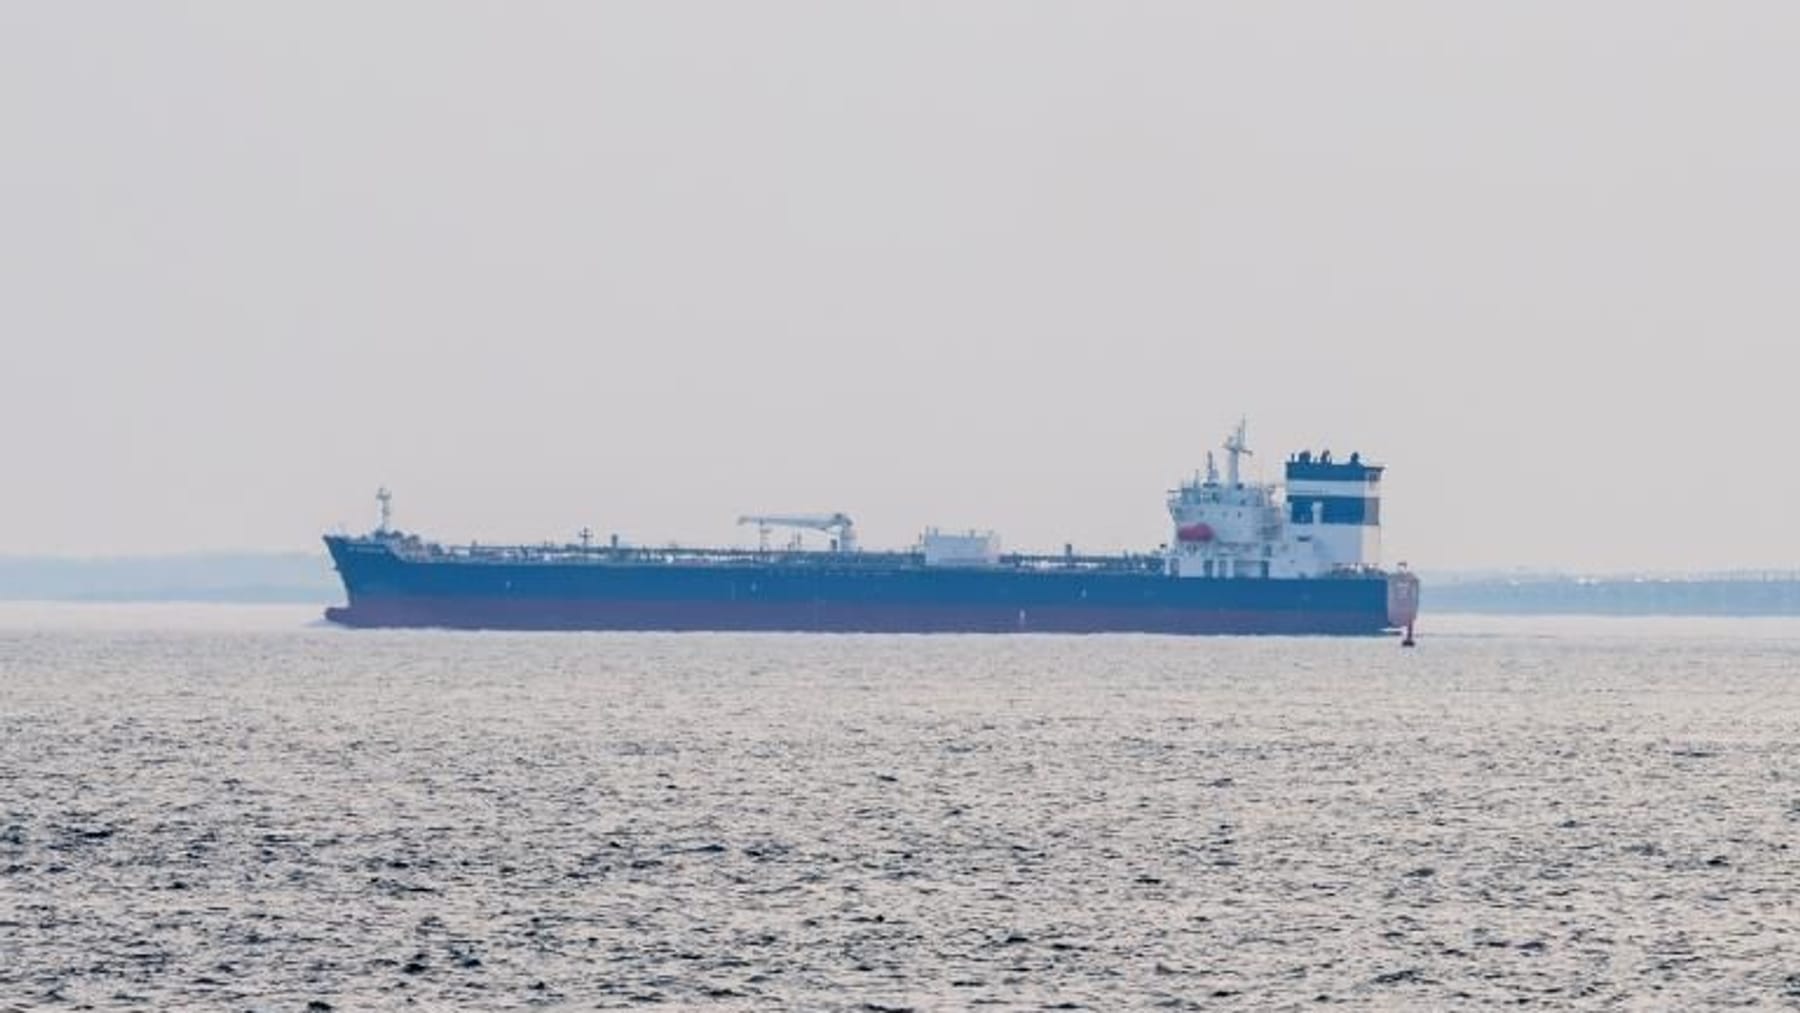 Gulf of Oman: The Iranian regime appears to have hijacked oil tankers